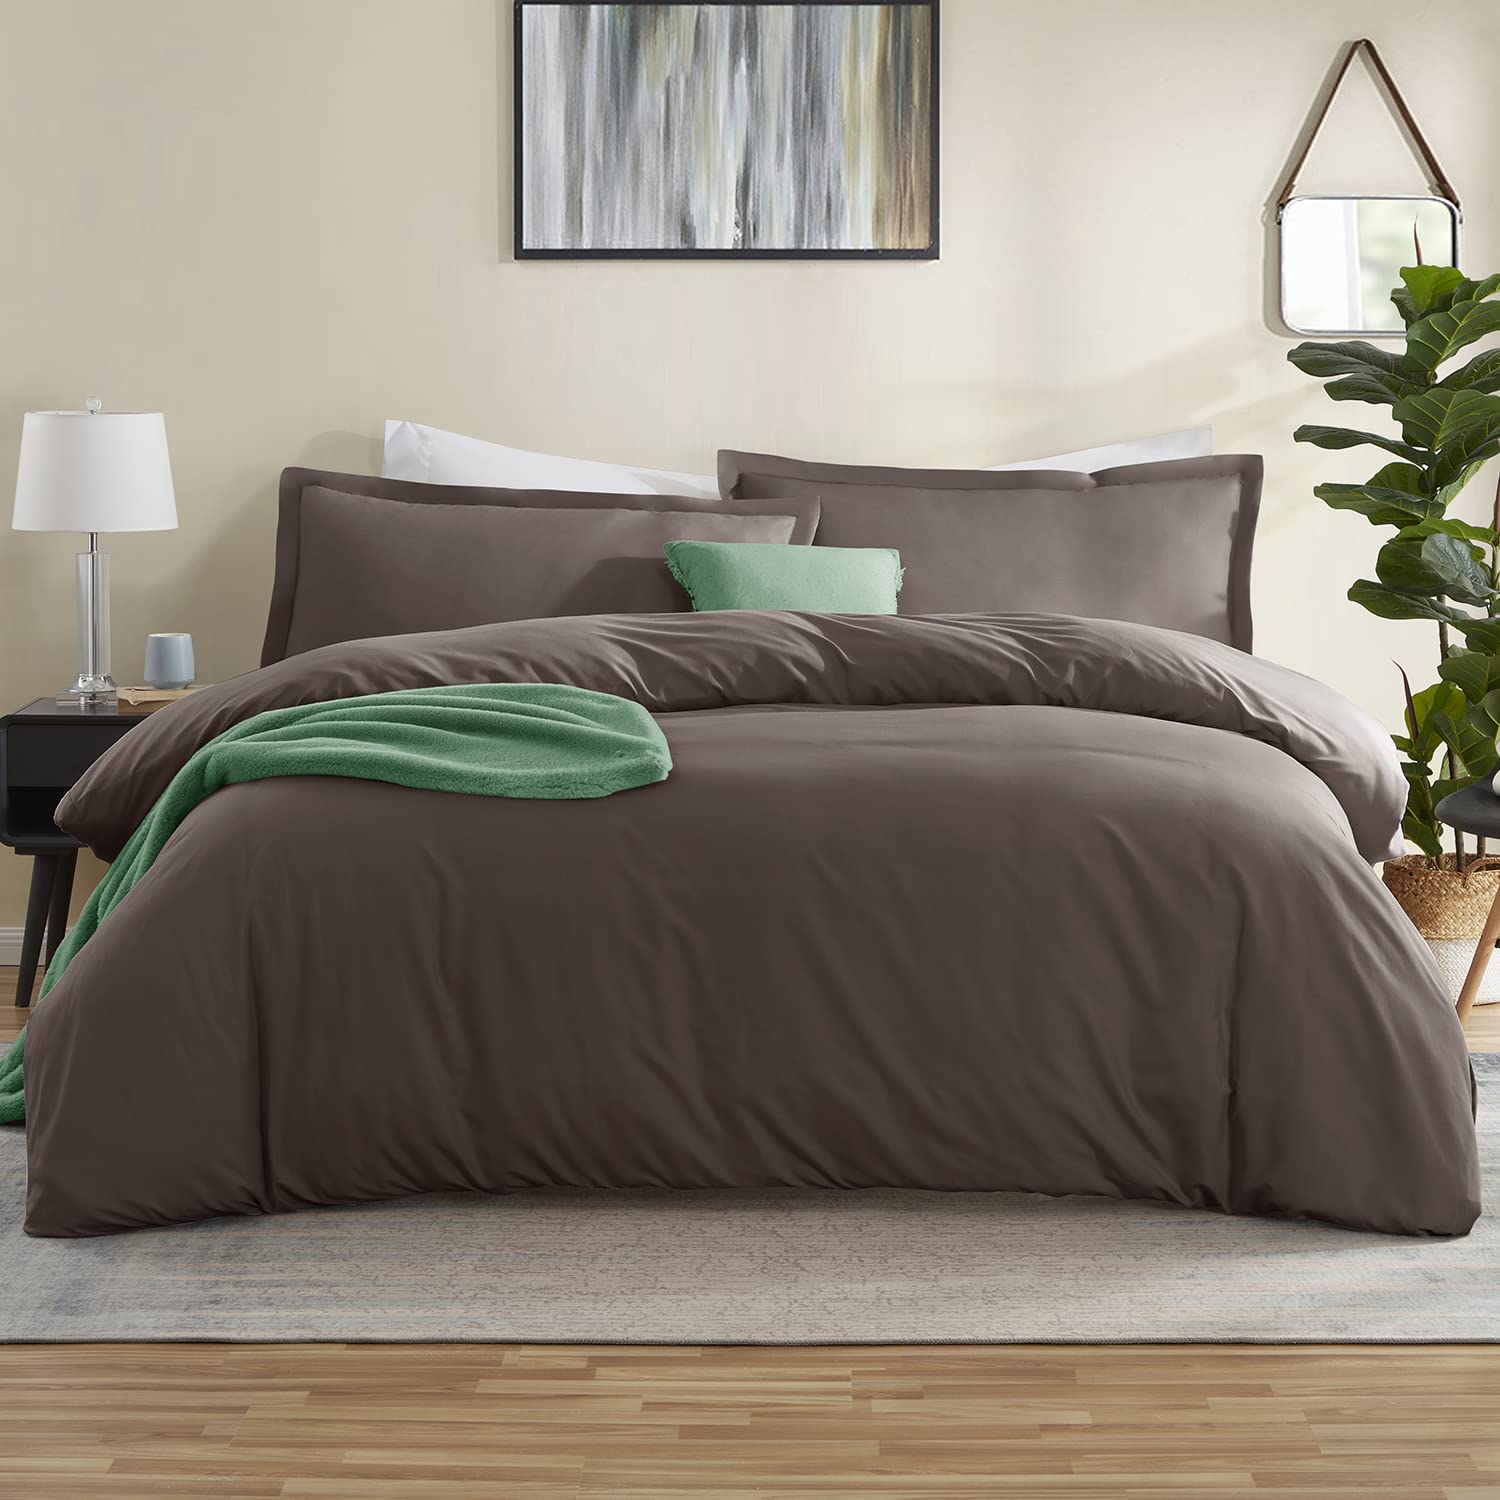 Book Cover Nestl Chocolate Brown Duvet Cover Queen Size - Soft Queen Duvet Cover Set, 3 Piece Double Brushed Queen Size Duvet Covers with Button Closure, 1 Duvet Cover 90x90 inches and 2 Pillow Shams Chocolate Brown Queen